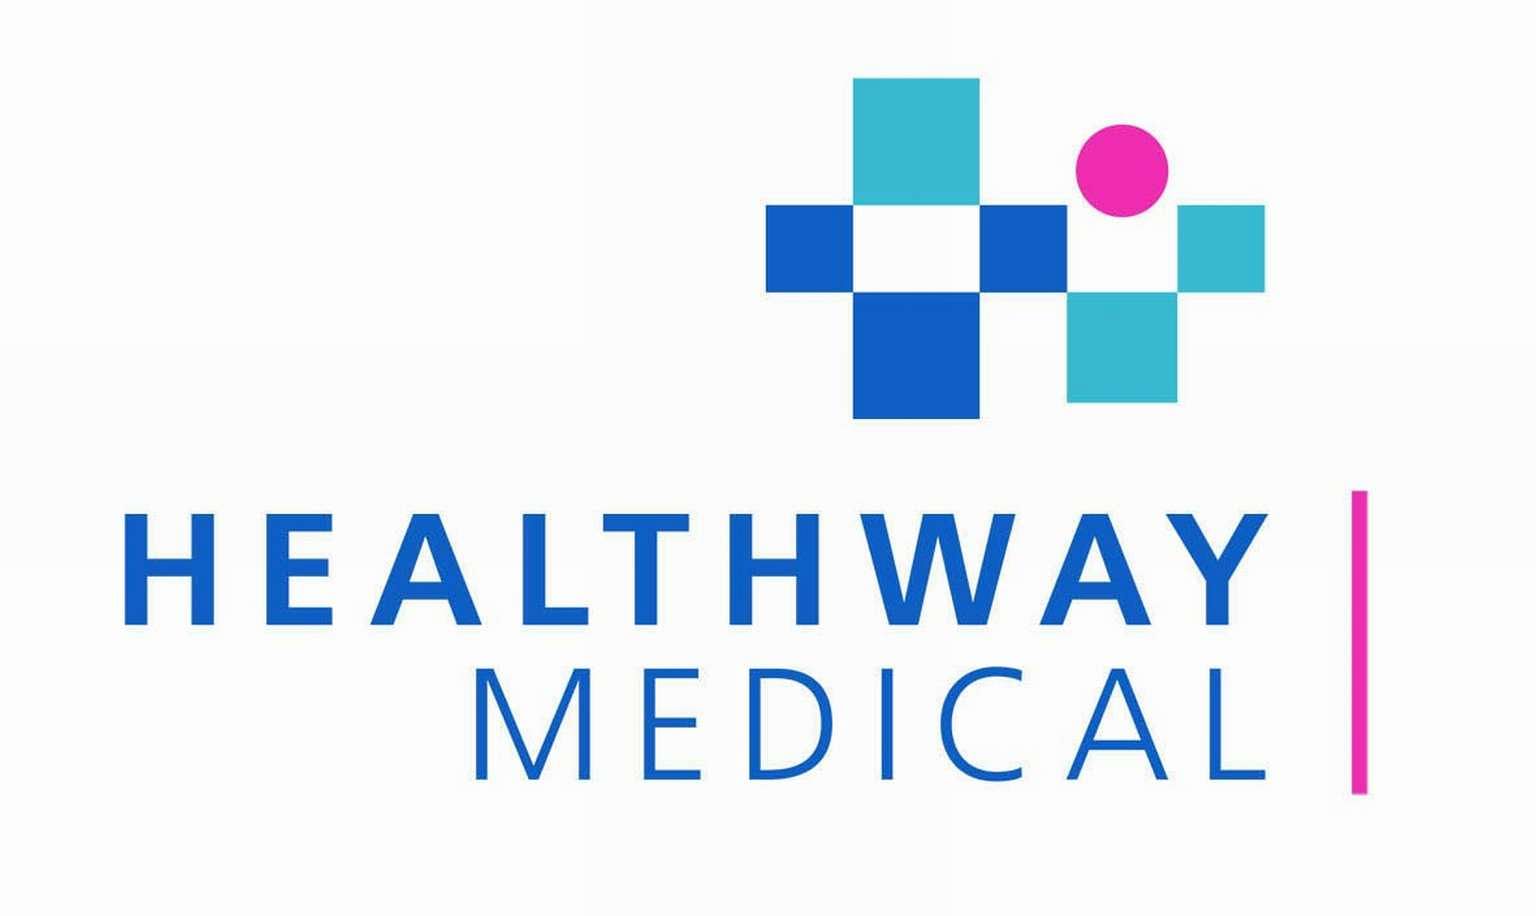 Lippo Launches Offer To Take Control Of Healthway Medical At 4 2 Cents A Share Business News Top Stories The Straits Times